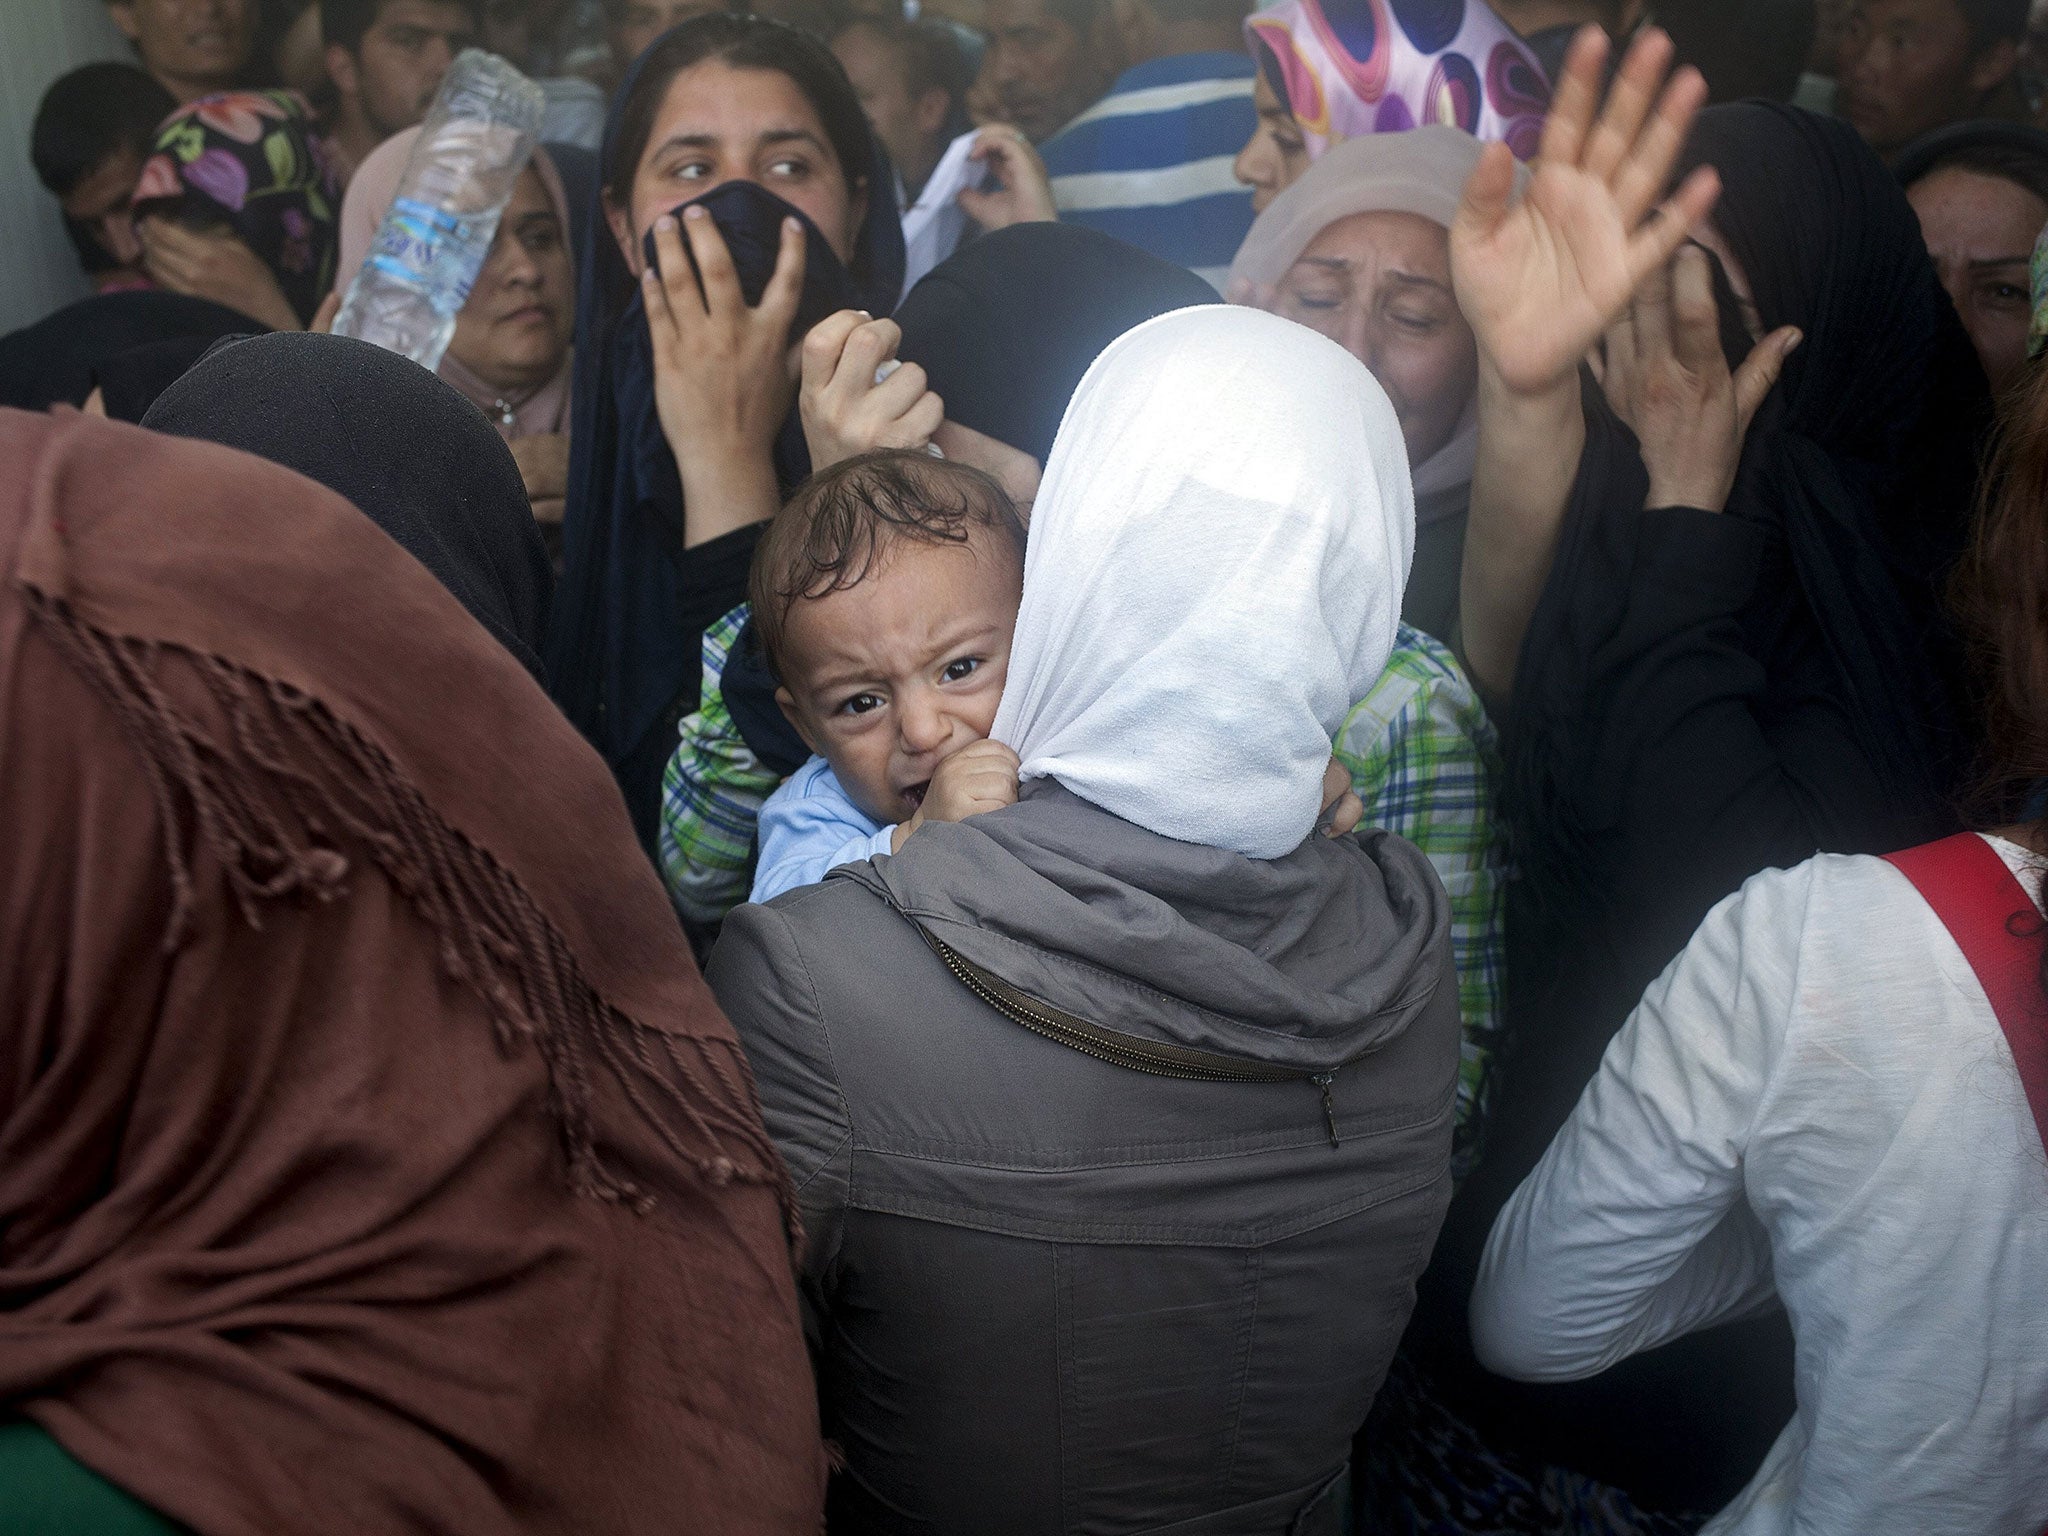 A baby cries during scuffles between refugees and police at the port of Mytilene on the Greek island of Lesbos on 6 September, 2015